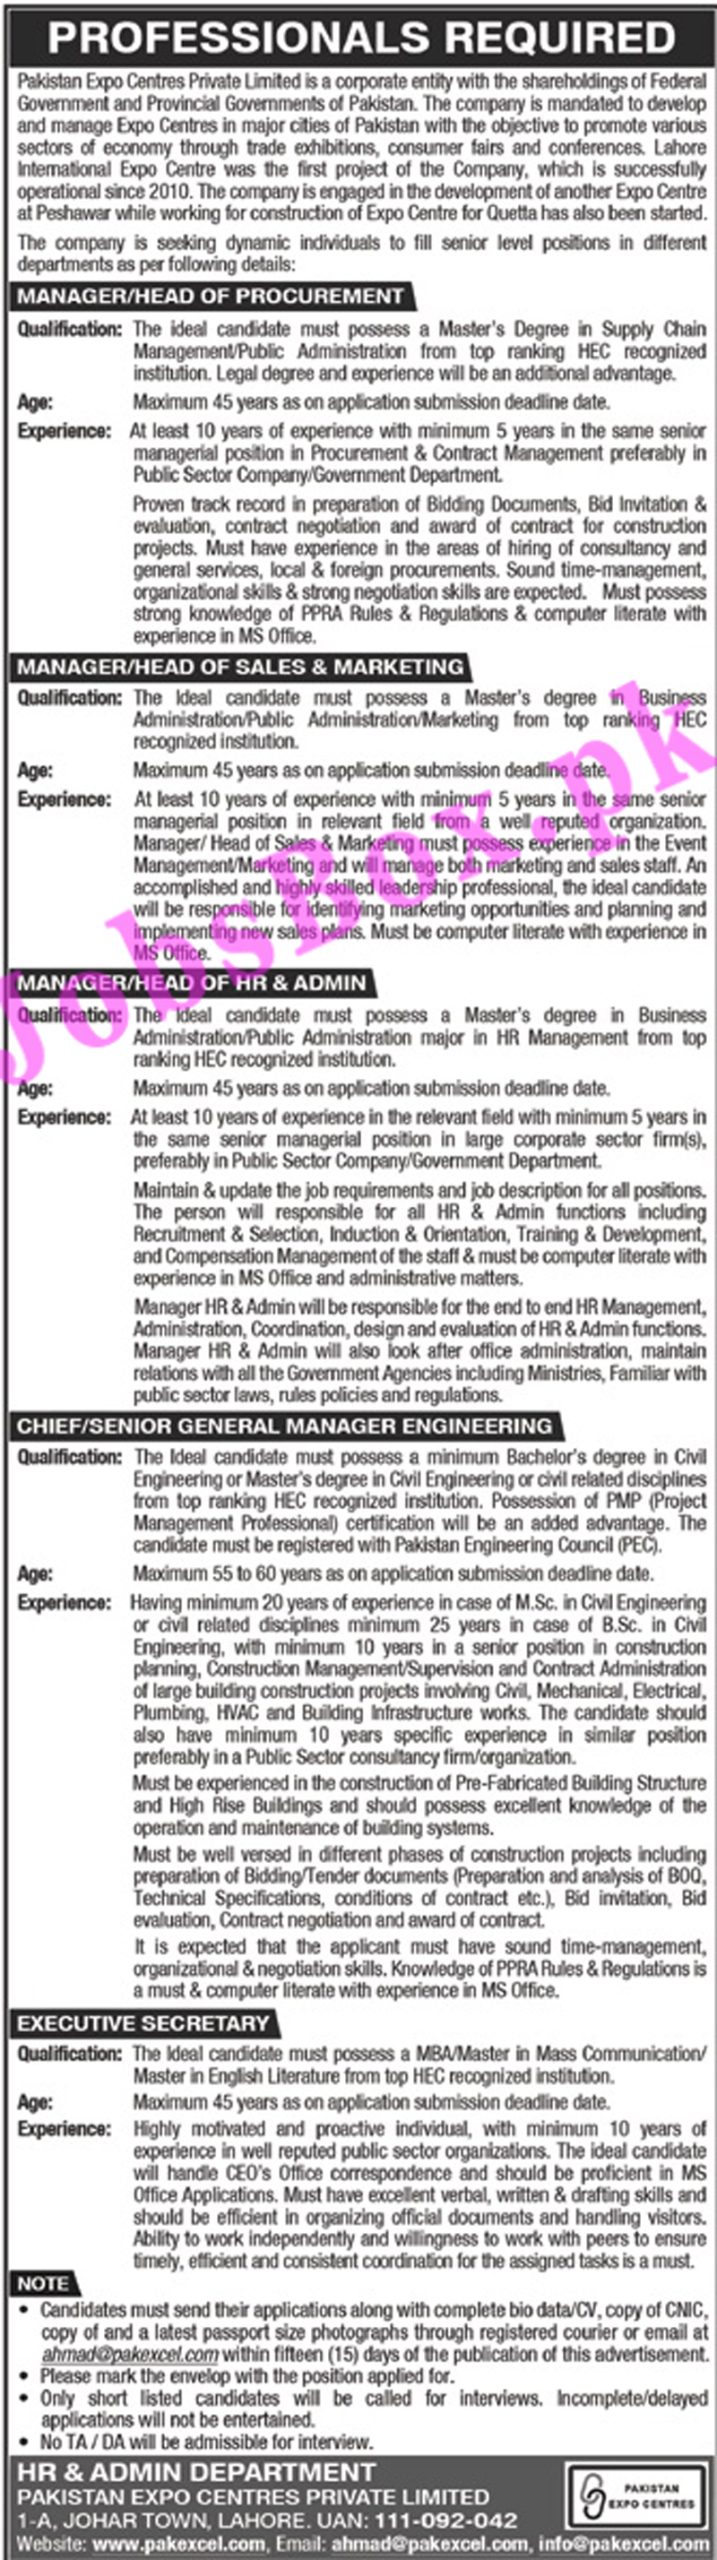 www.pakexcel.com - Pakistan Expo Centres Private Limited Jobs 2021 in Pakistan